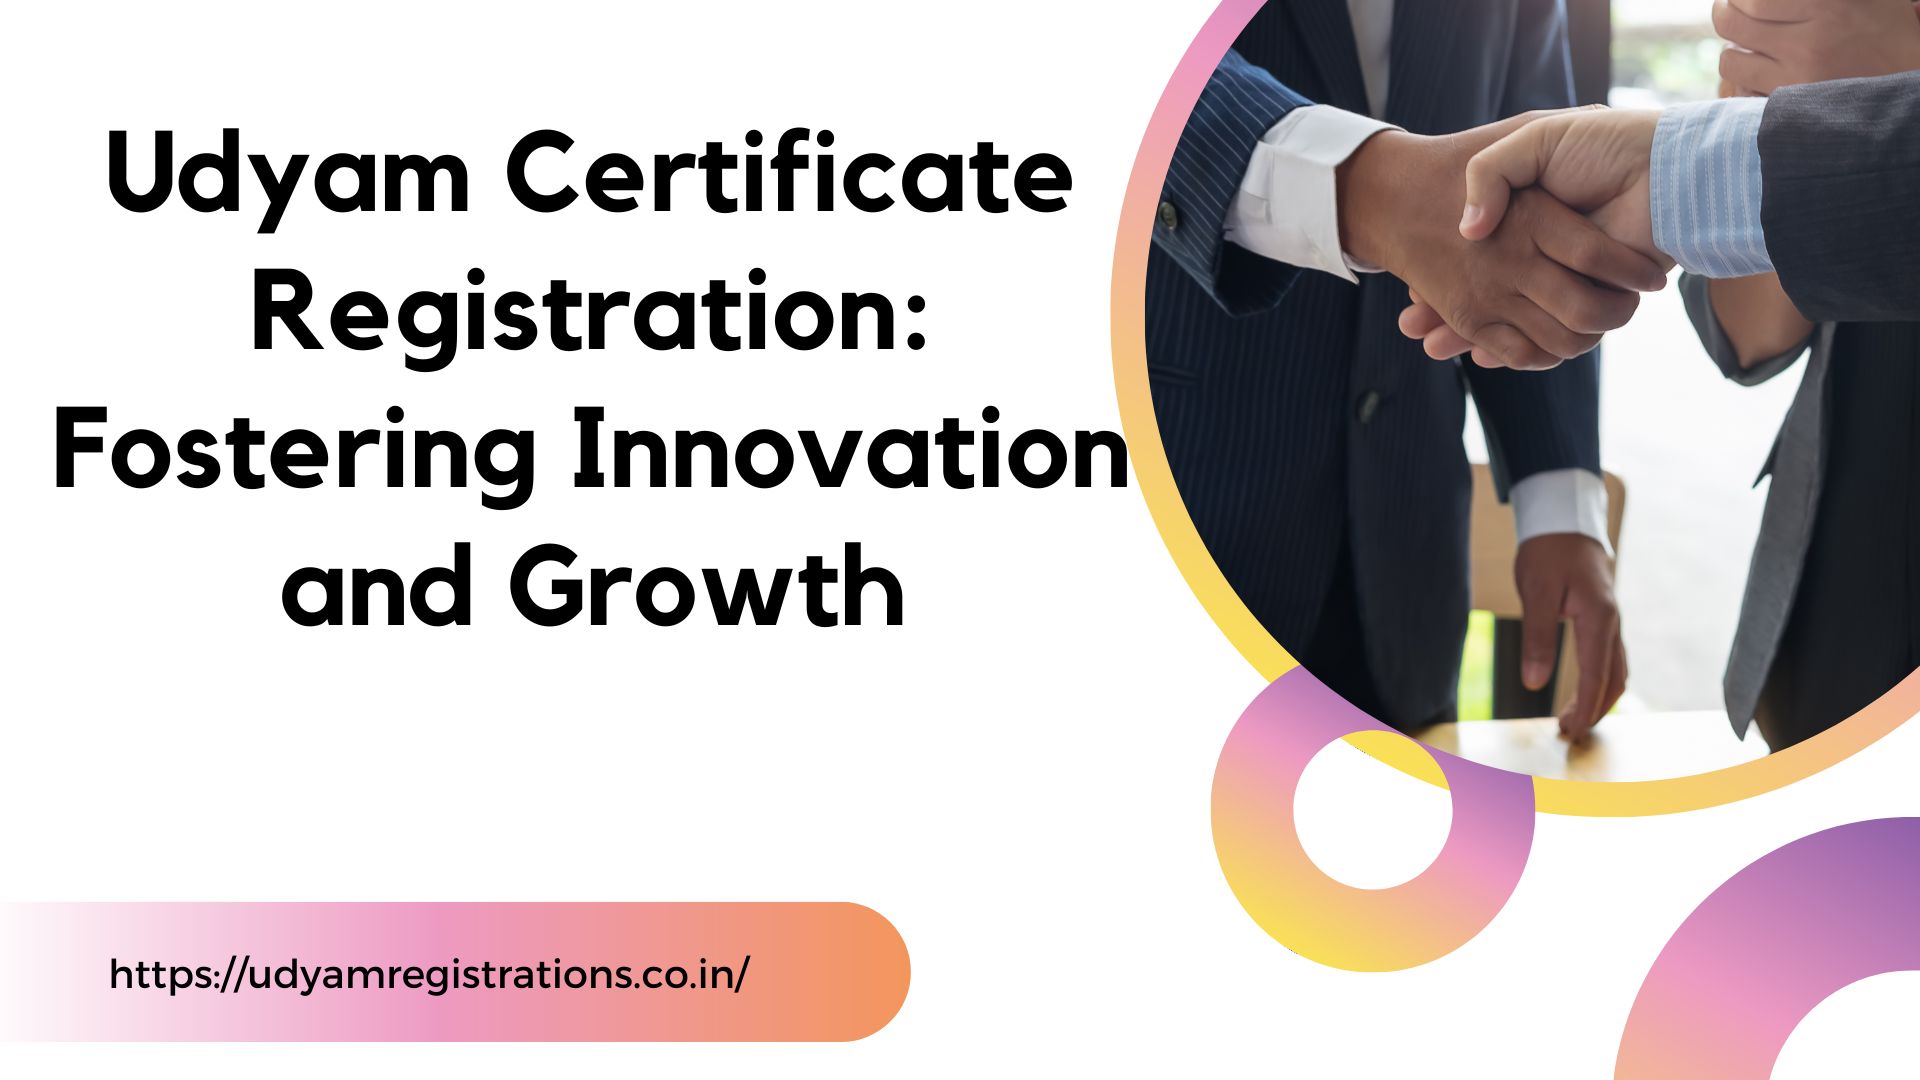 Udyam Certificate Registration: Fostering Innovation and Growth